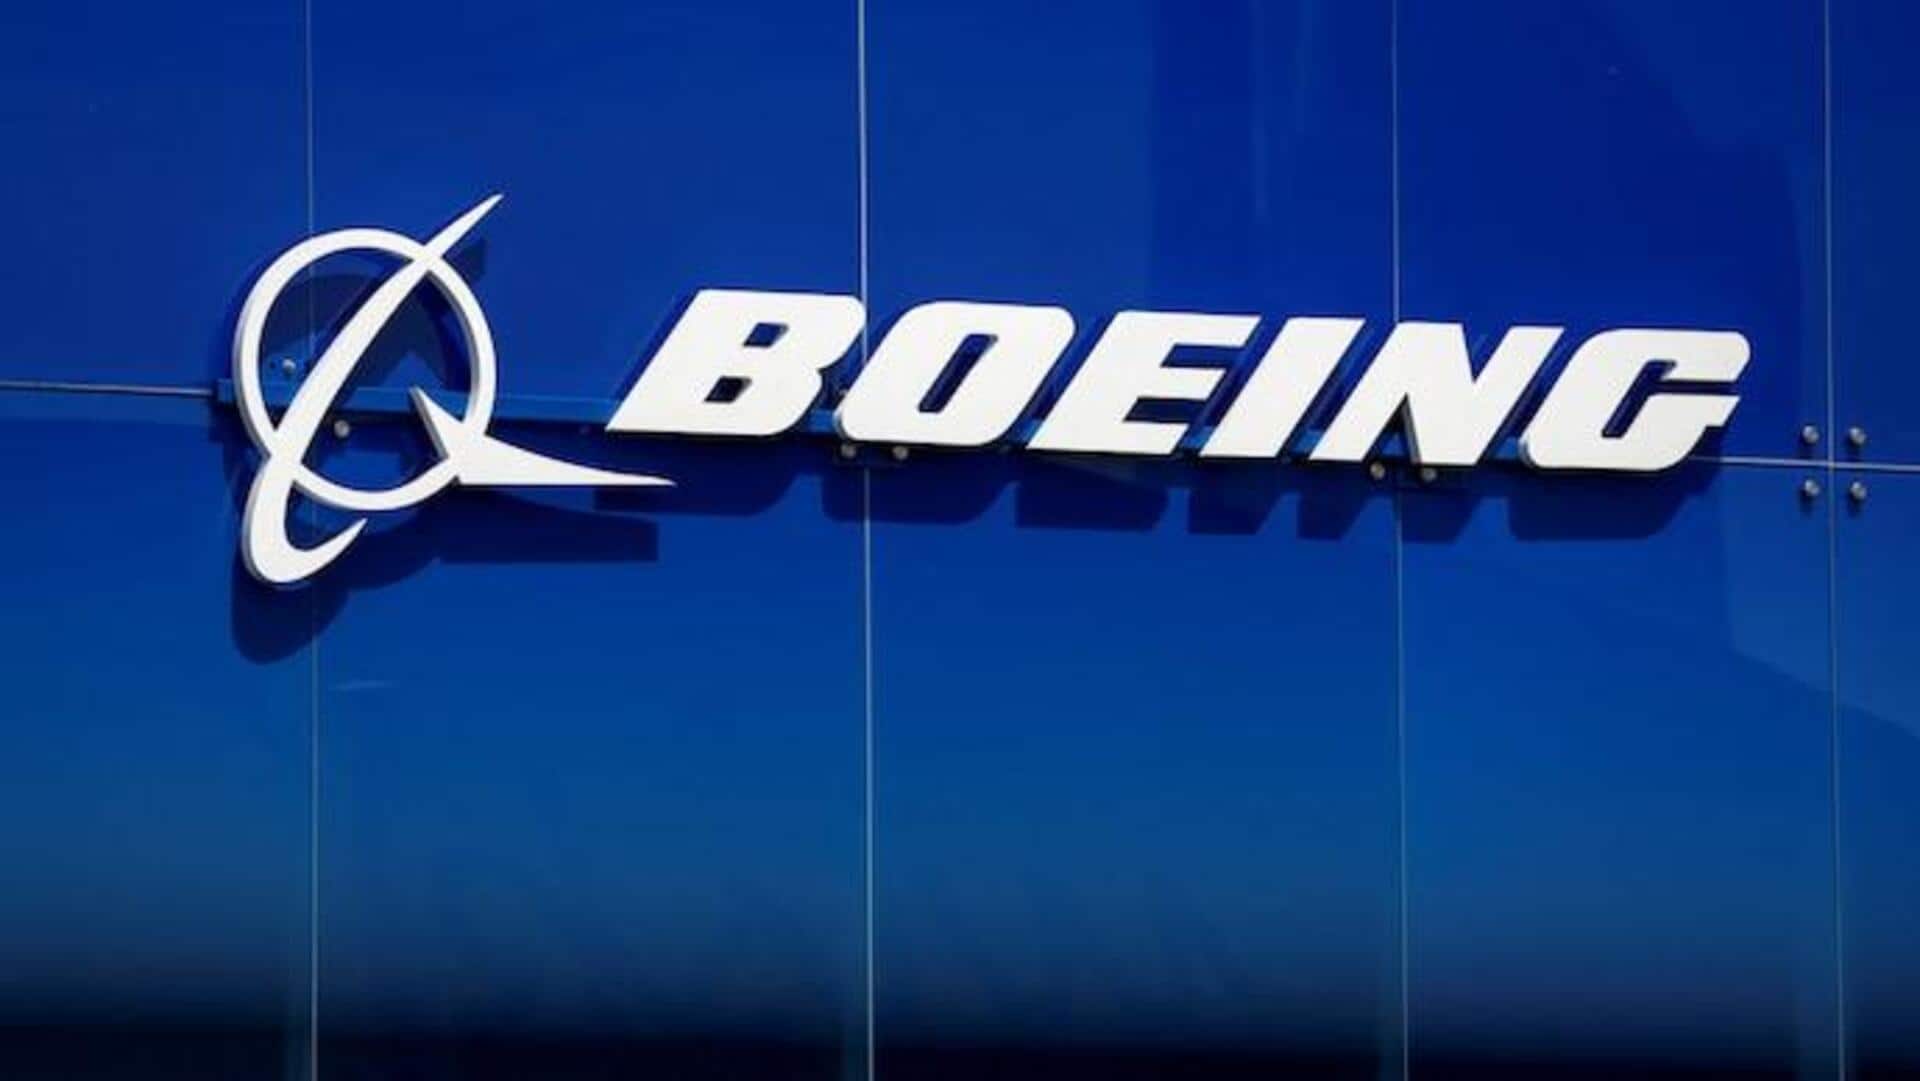 Boeing pledges significant changes to restore trust and improve quality